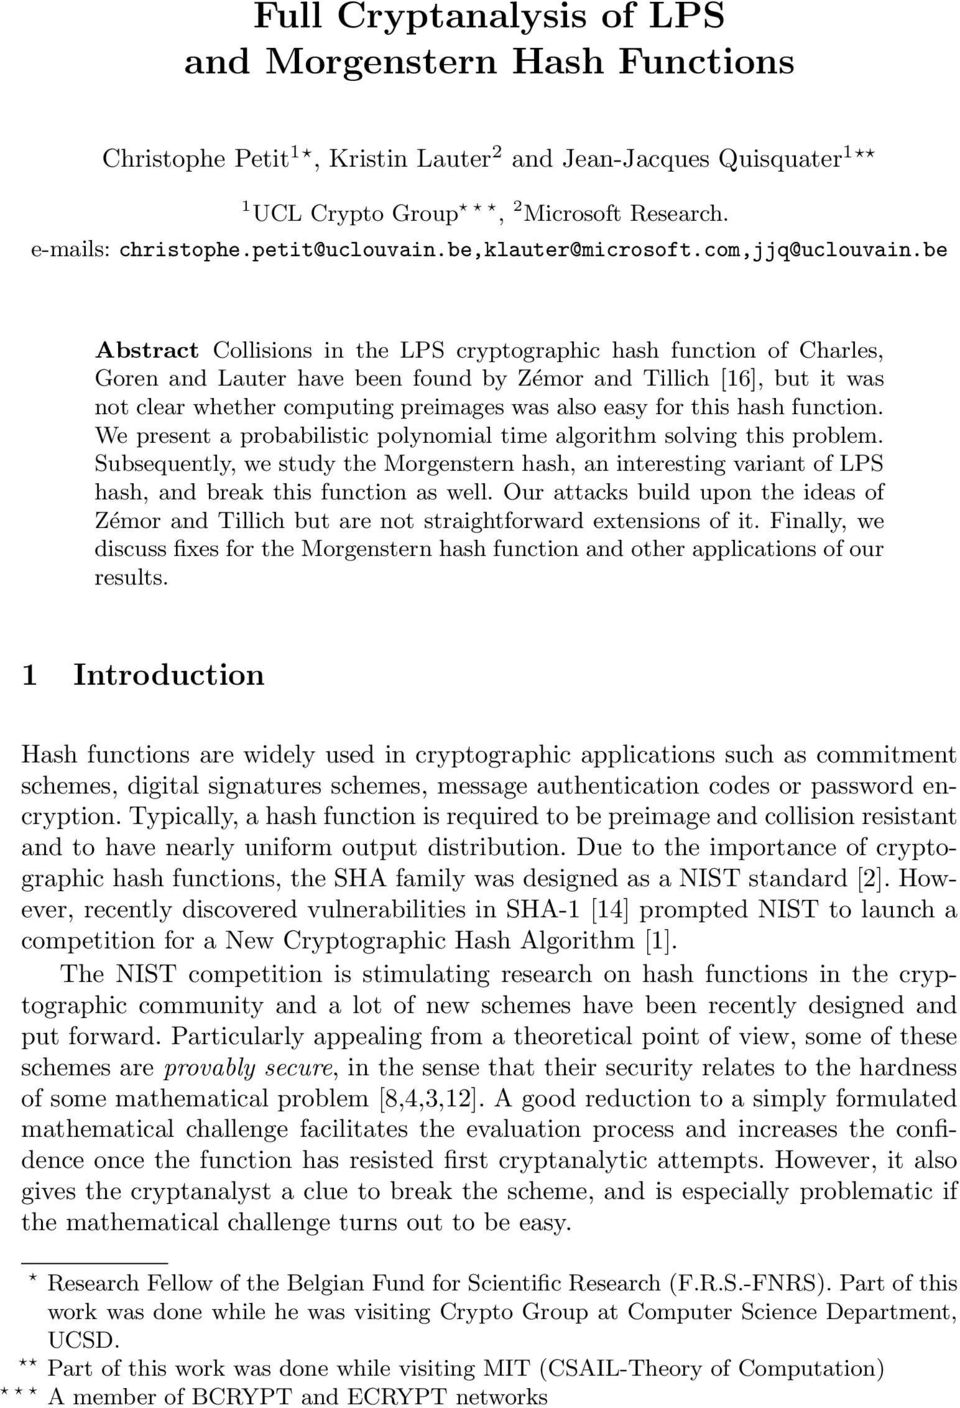 be Abstract Collisions in the LPS cryptographic hash function of Charles, Goren and Lauter have been found by Zémor and Tillich [16], but it was not clear whether computing preimages was also easy